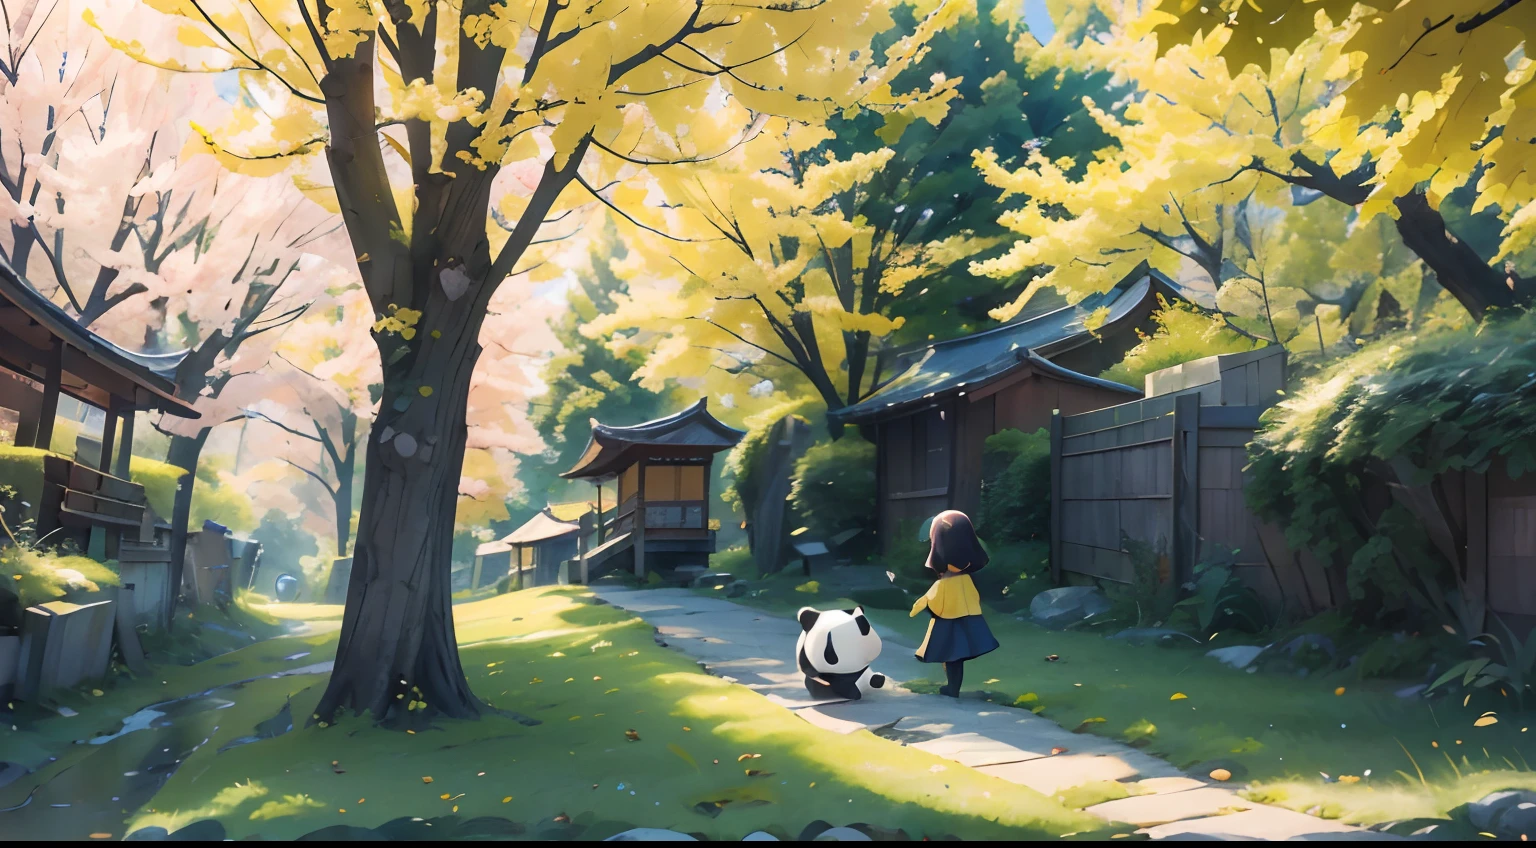 Yellow ginkgo tree，There is a cartoon , A panda， and panda walk under yellow ginkgo trees, There are a lot of ginkgo leaves on the ground，Overlooking, landscape,Morning, Soft light, Ray tracing, ghibli artstyle, hand painted style